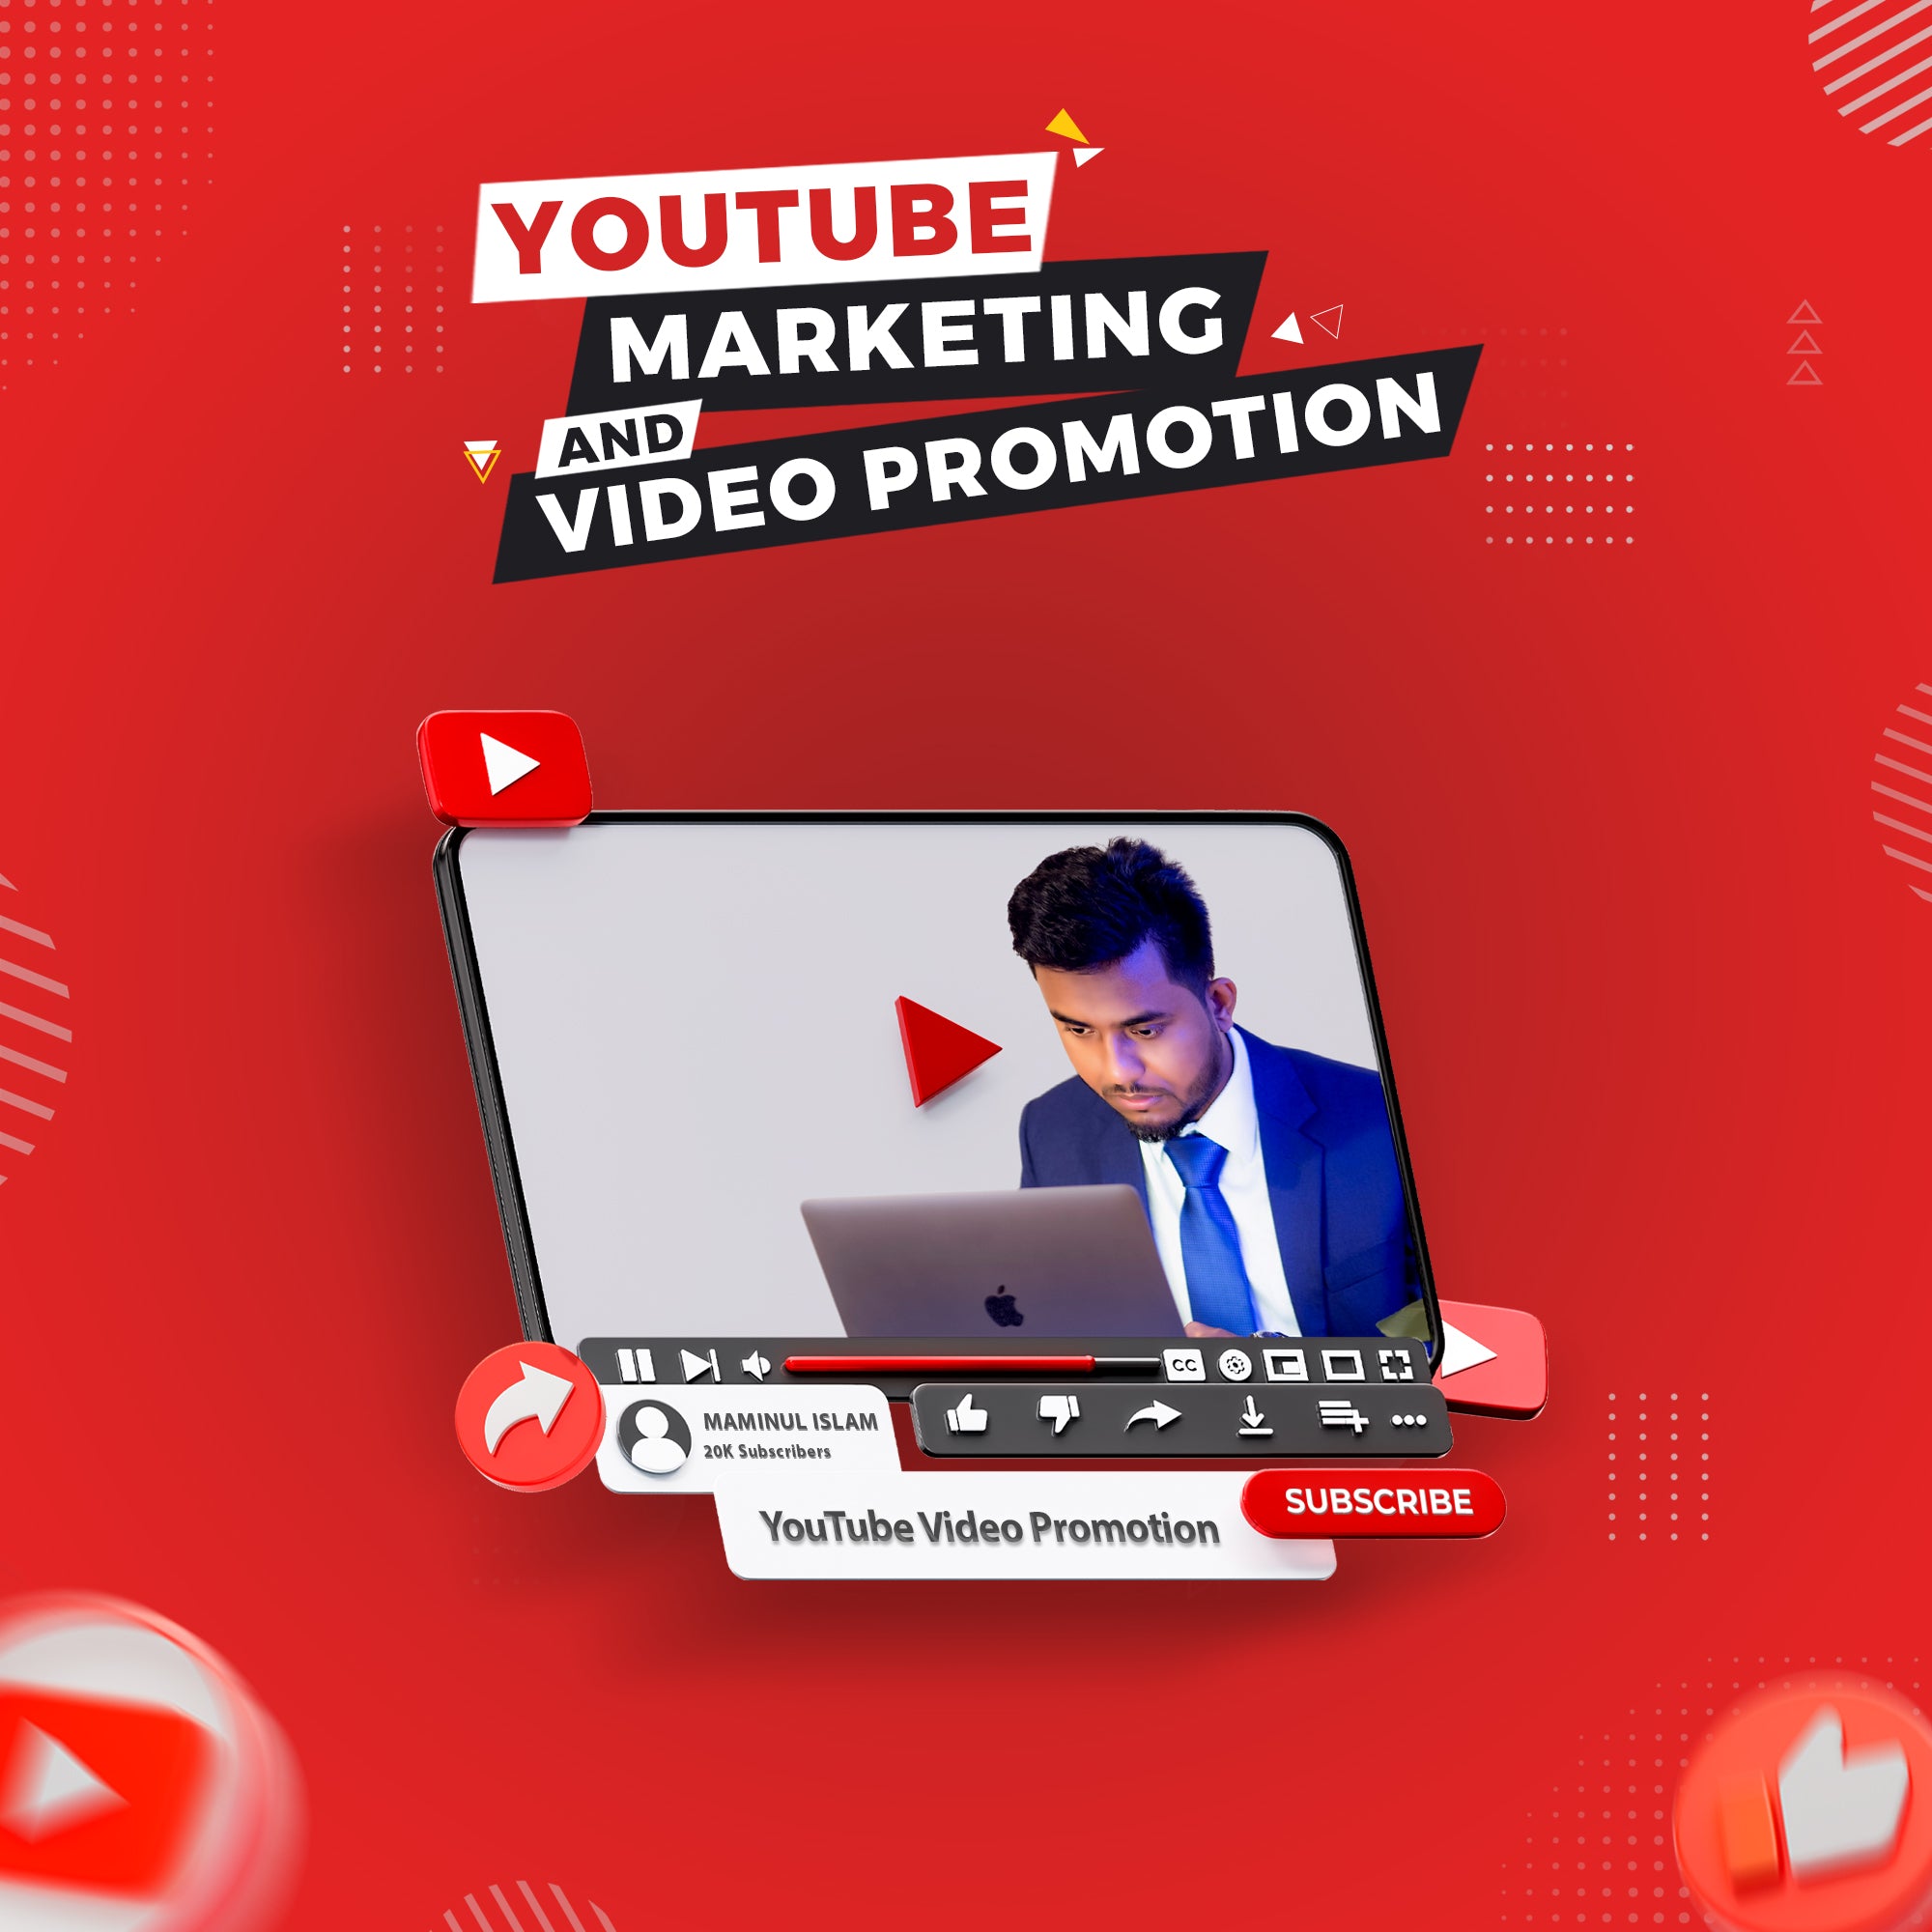 YouTube Marketing And Video Promotion